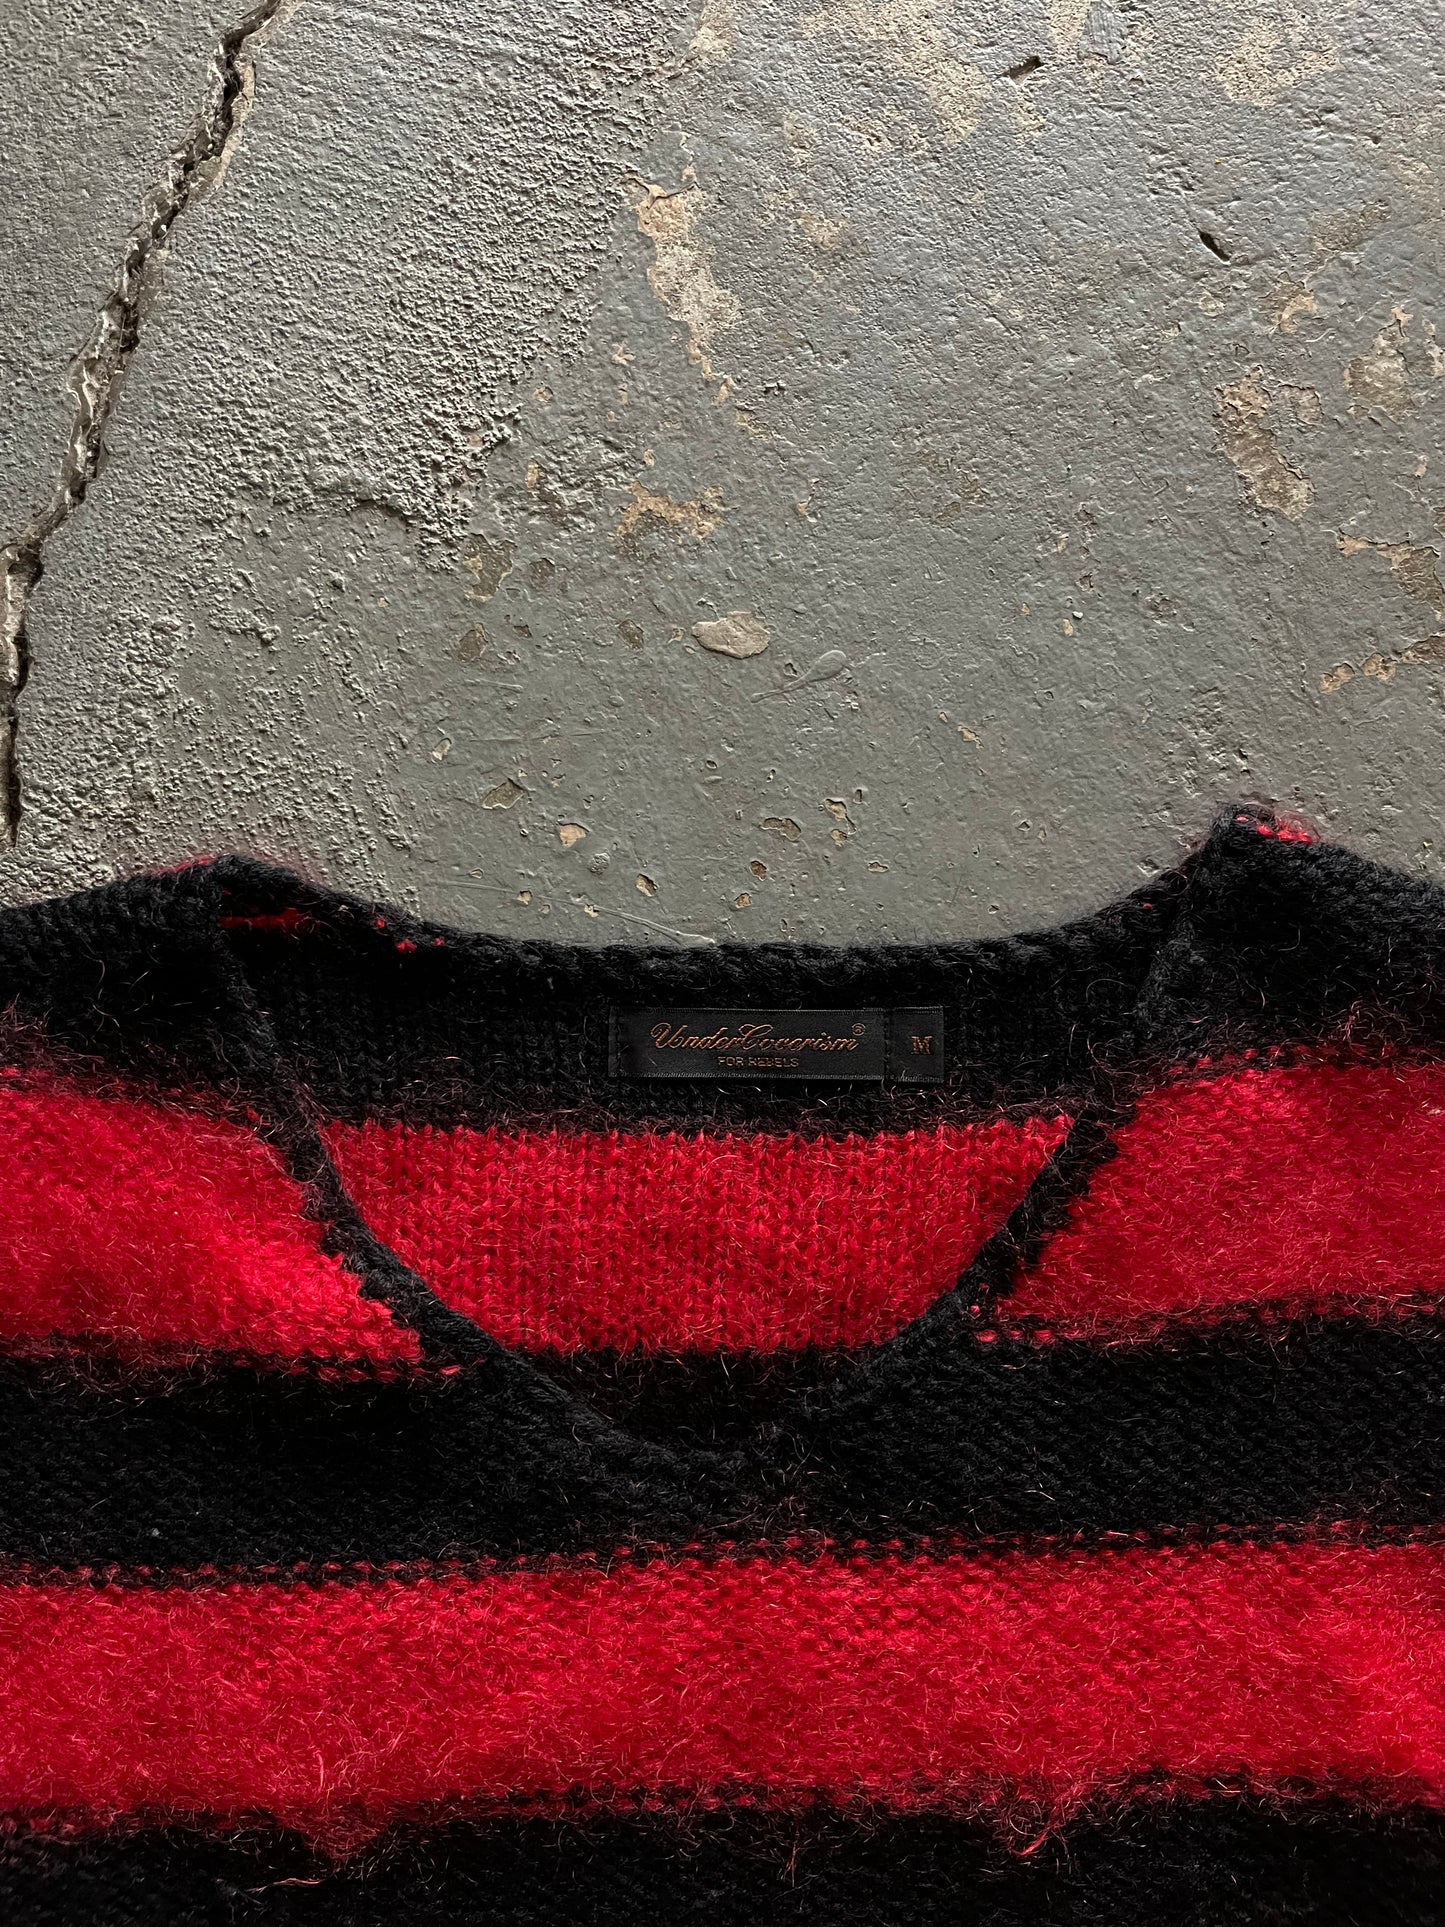 Undercover AW03 “Paper Doll” Striped Mohair Knit